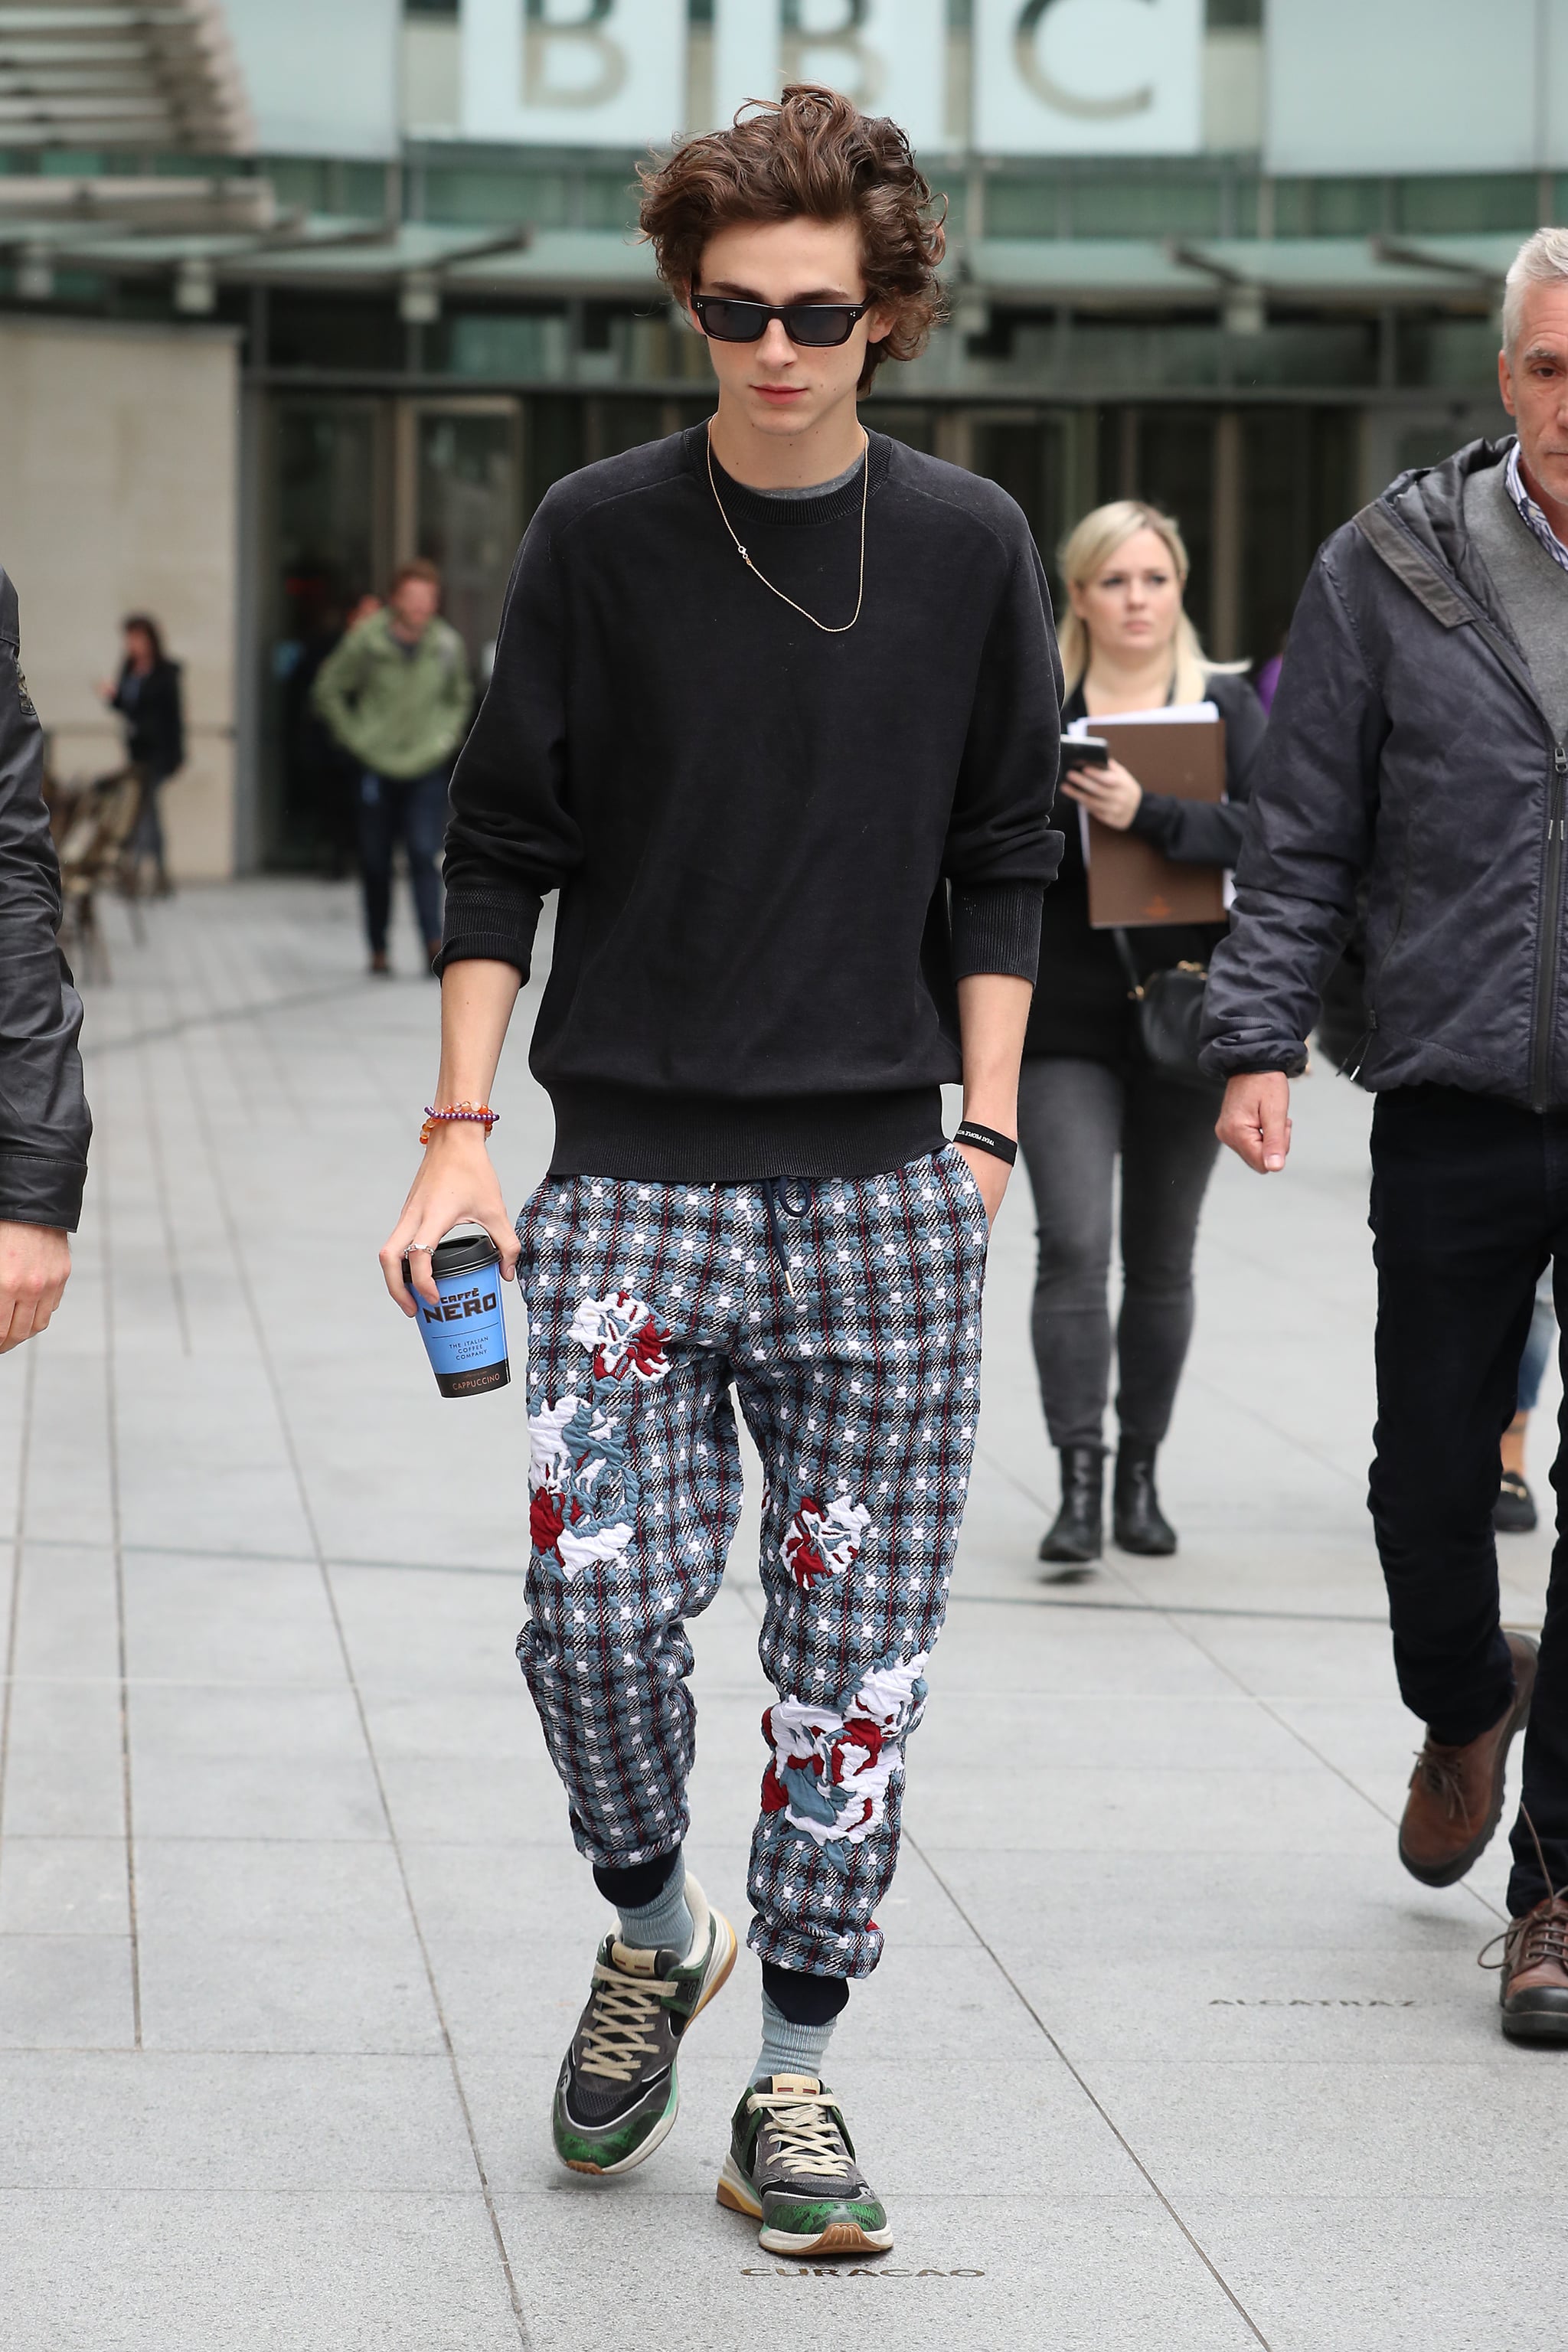 Yes, he's probably the only who can make checkered joggers | Timothée Chalamet's Endearing Street Style Makes Us Love Him Even More | POPSUGAR Fashion Photo 2